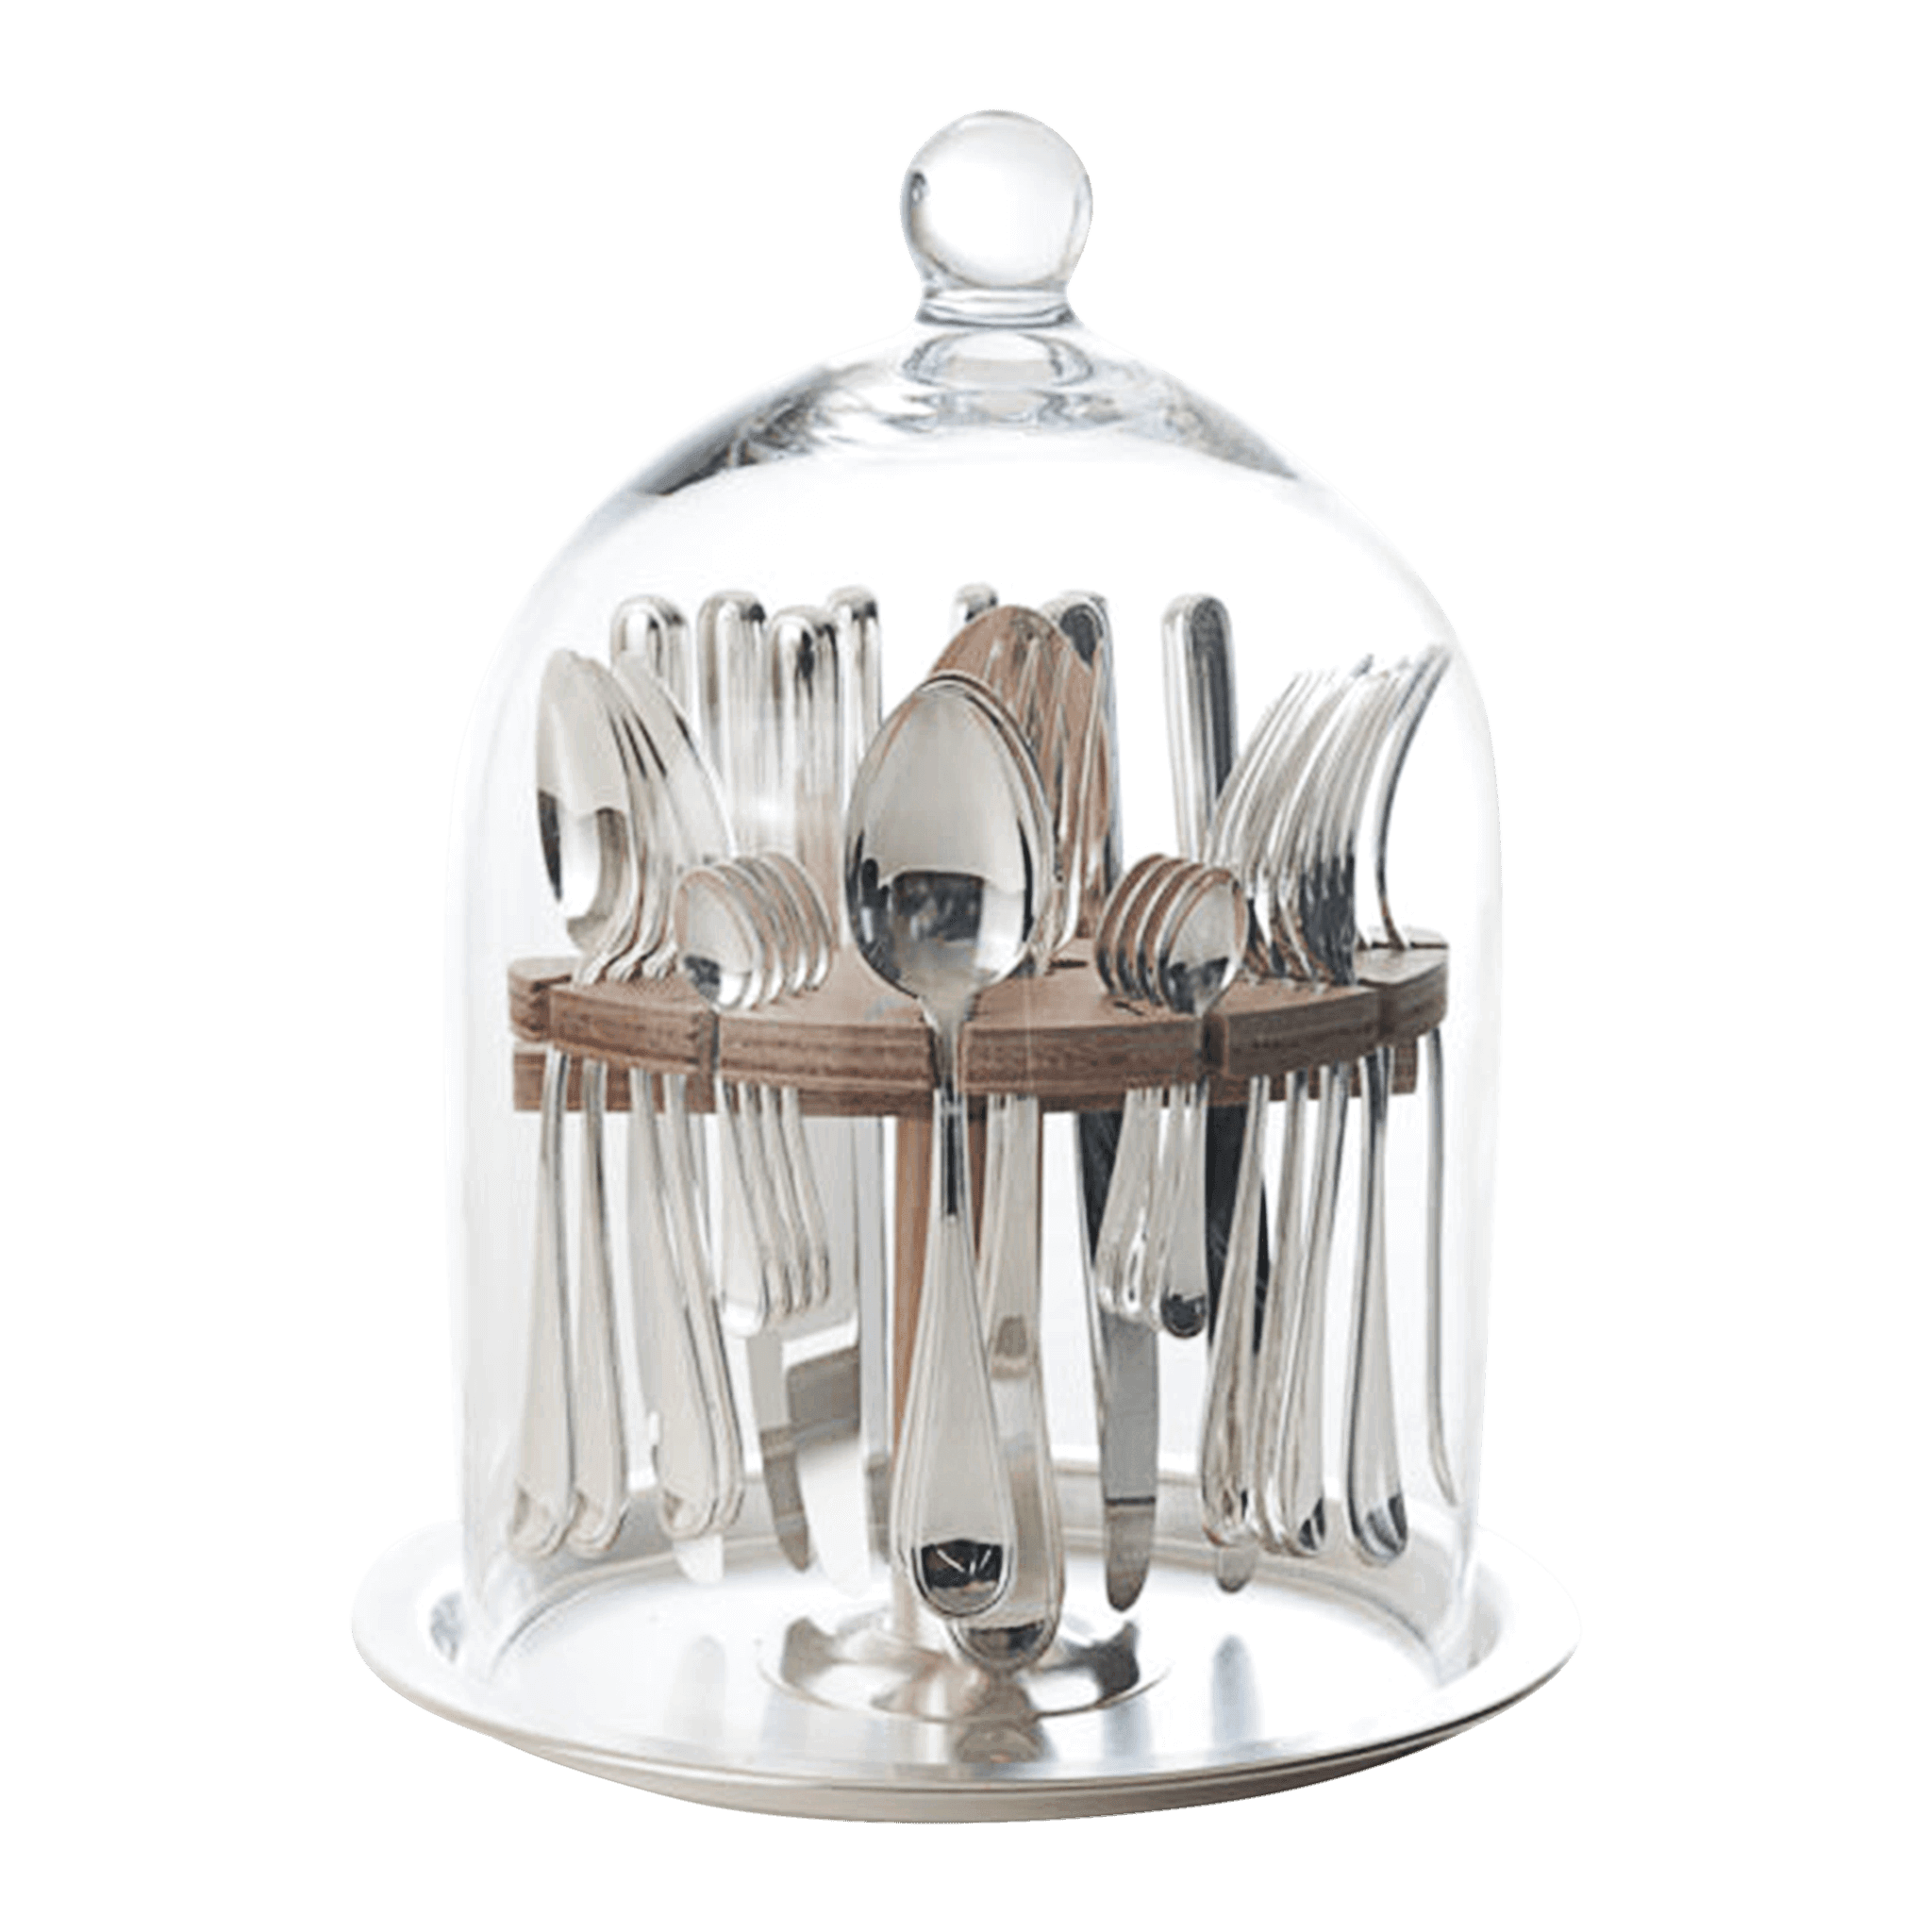 Anglia Silverware Set and Stand - Piece By Zion Hadad